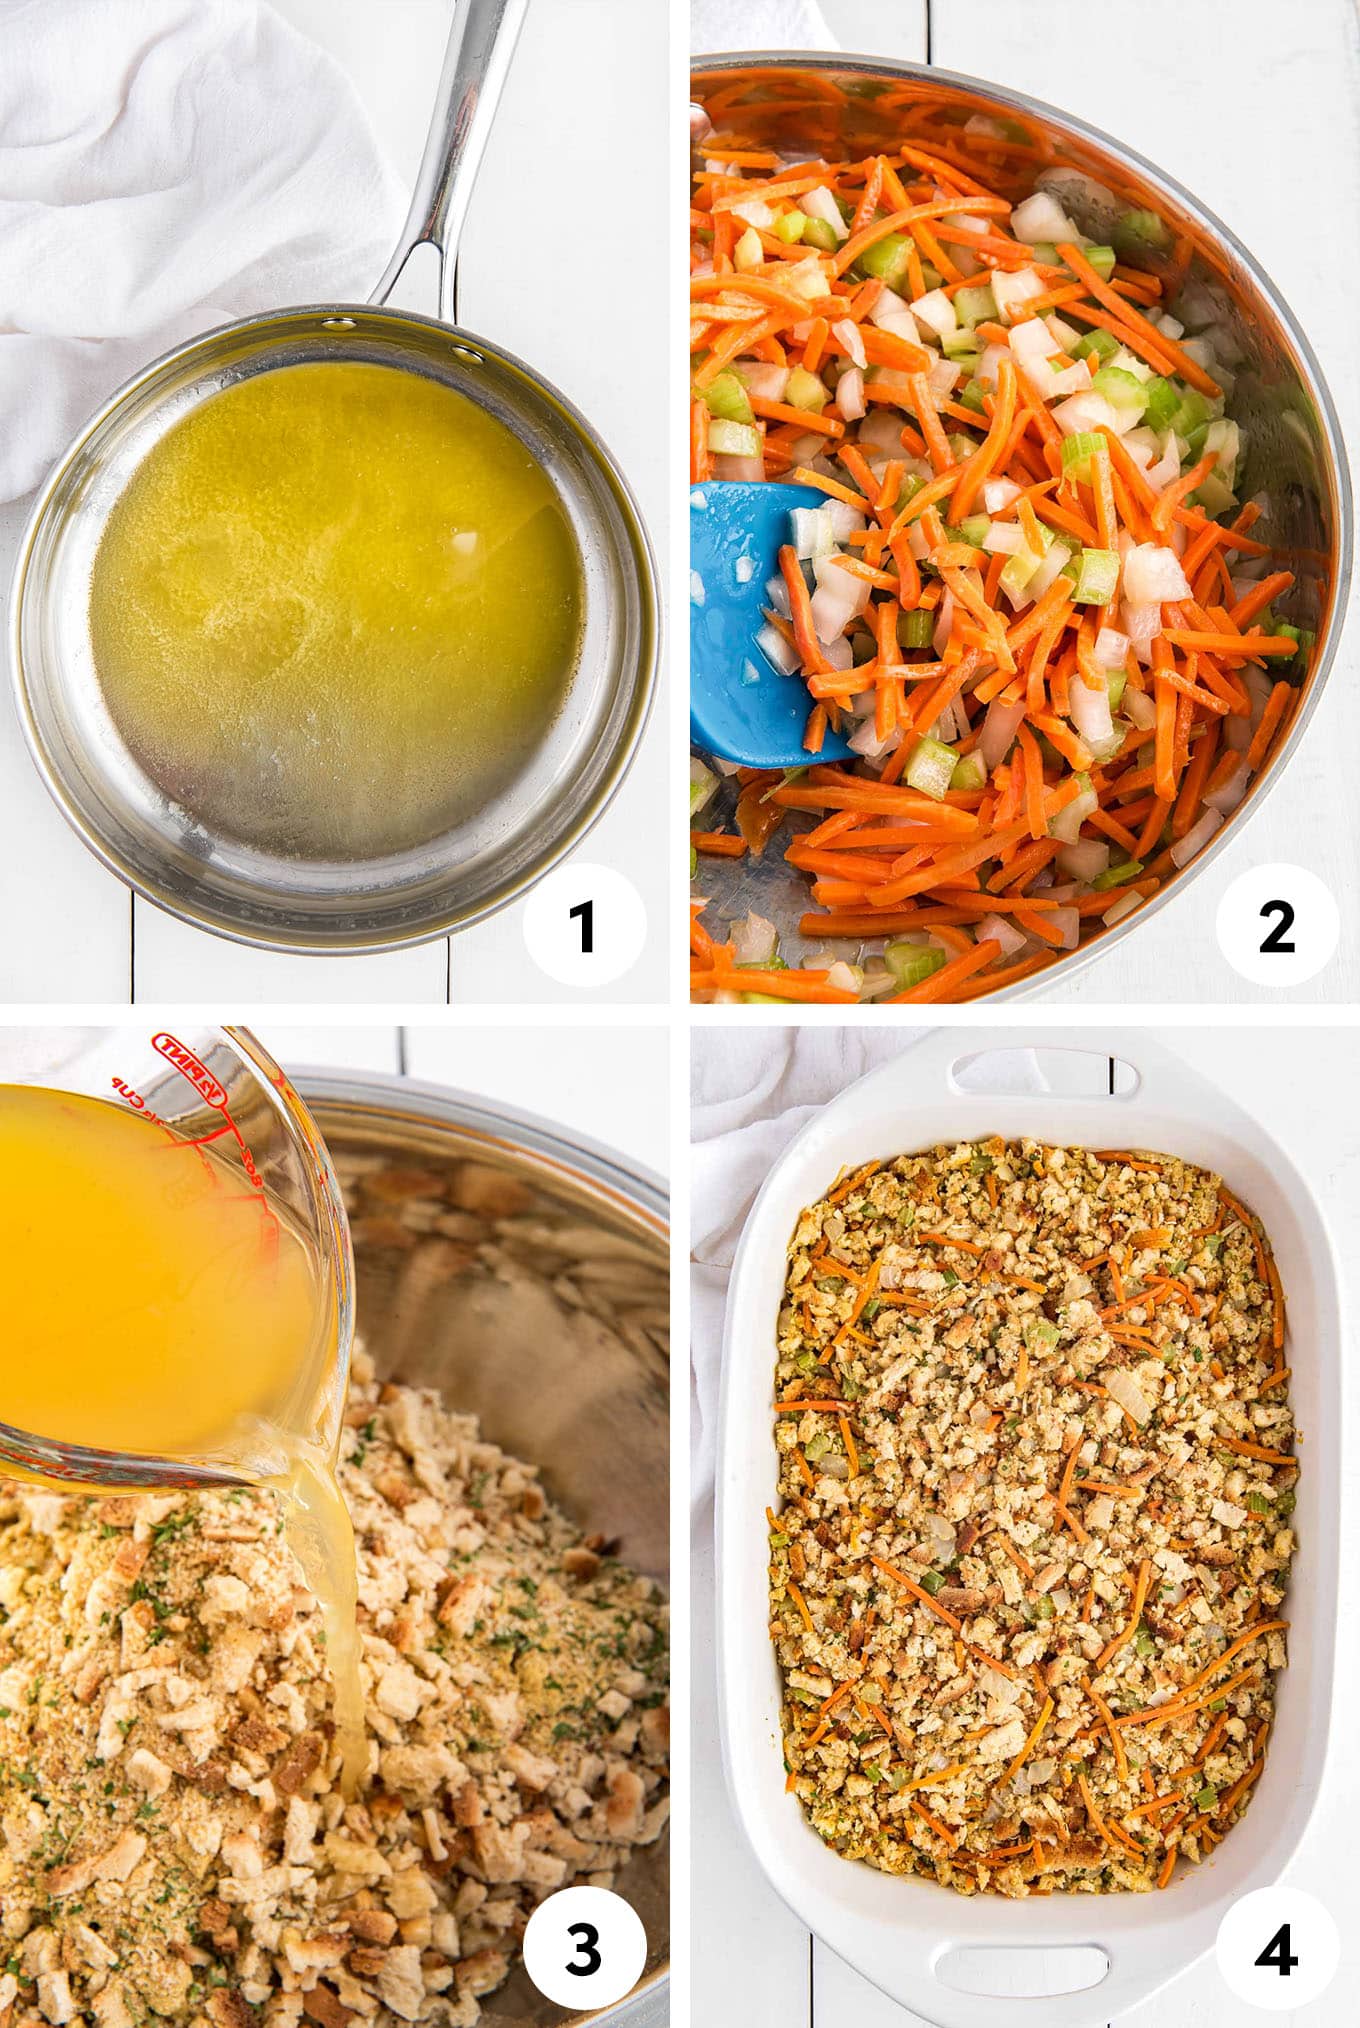 A collage of images from melting the butter to cooking the vegetables, then adding the stuffing mix and putting it in a baking dish.